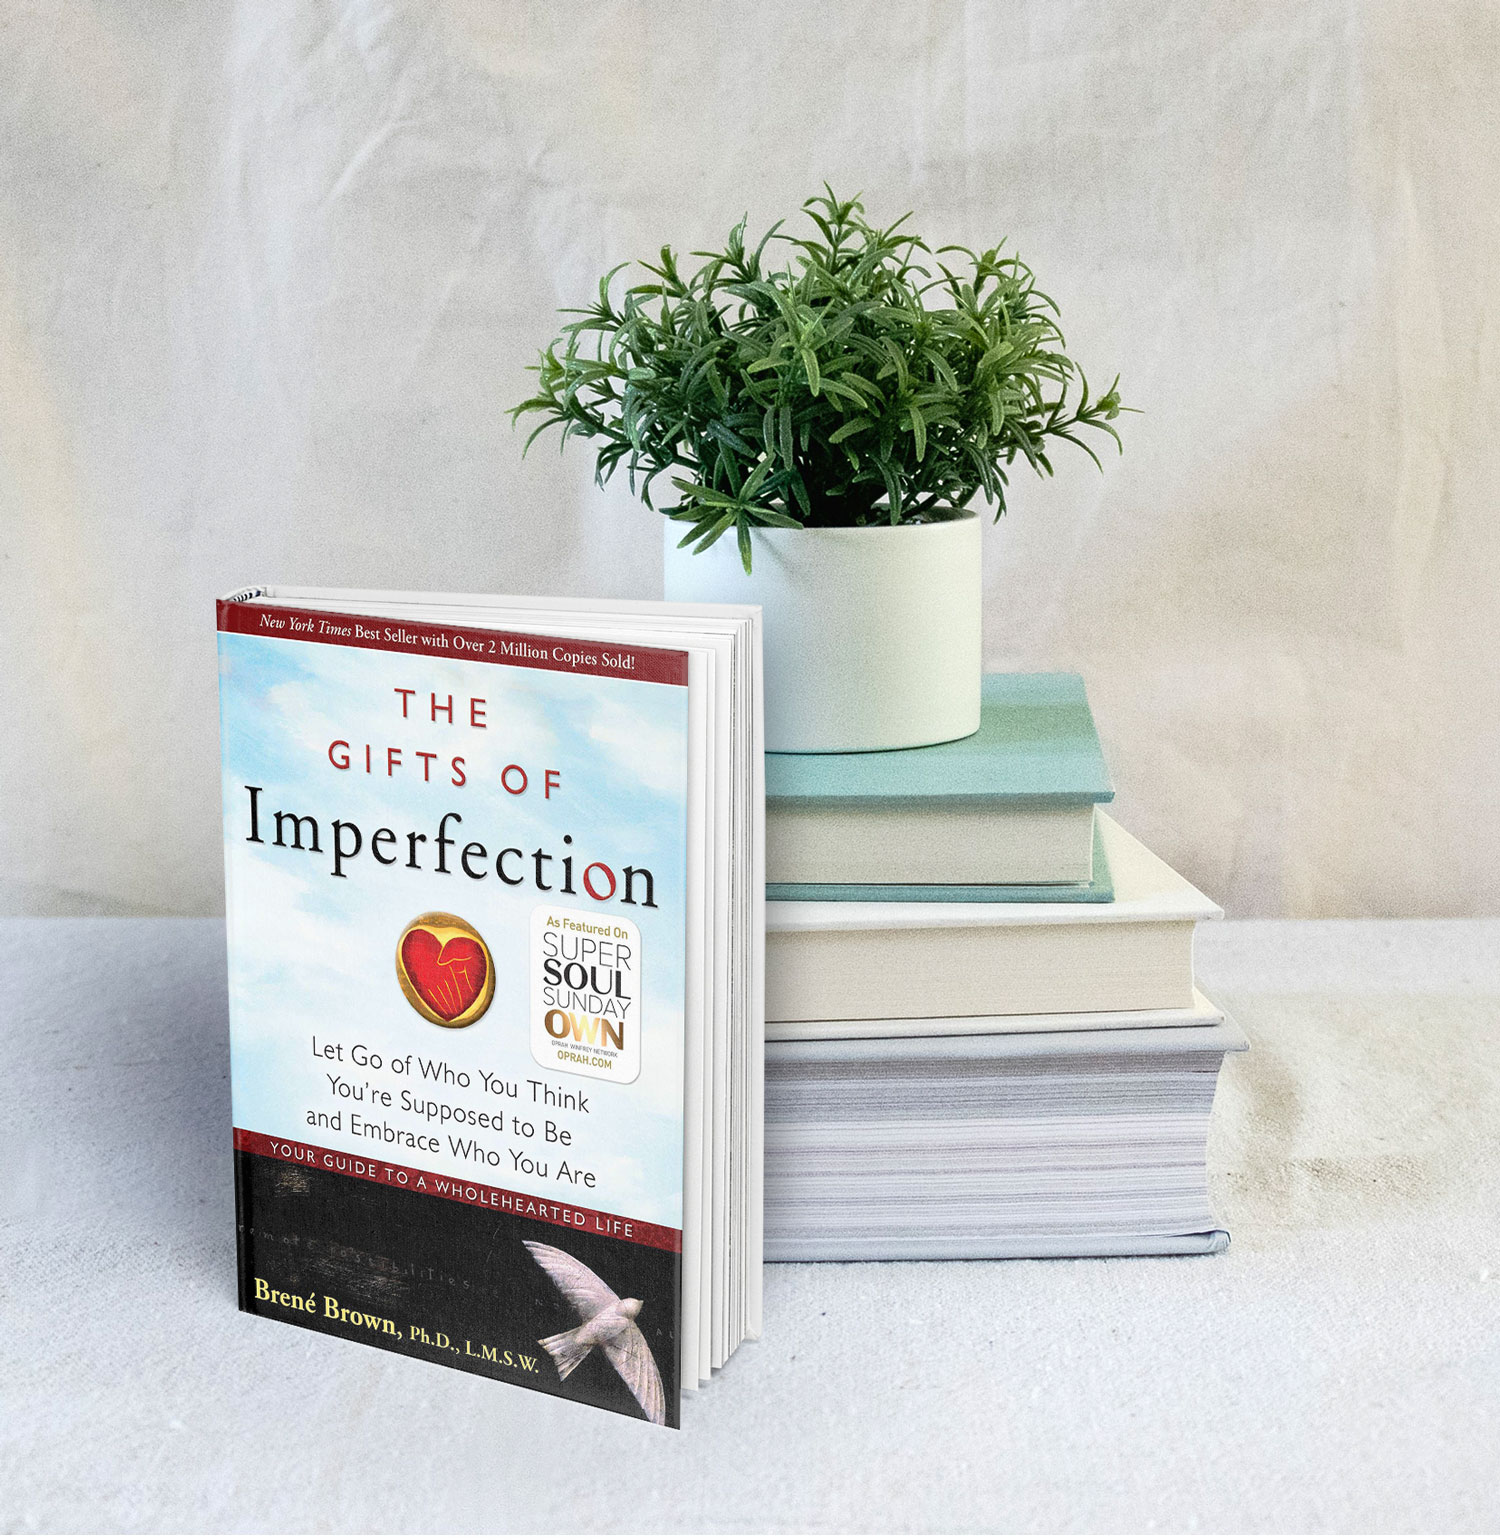 Stack of books and The Gift of Imperfection